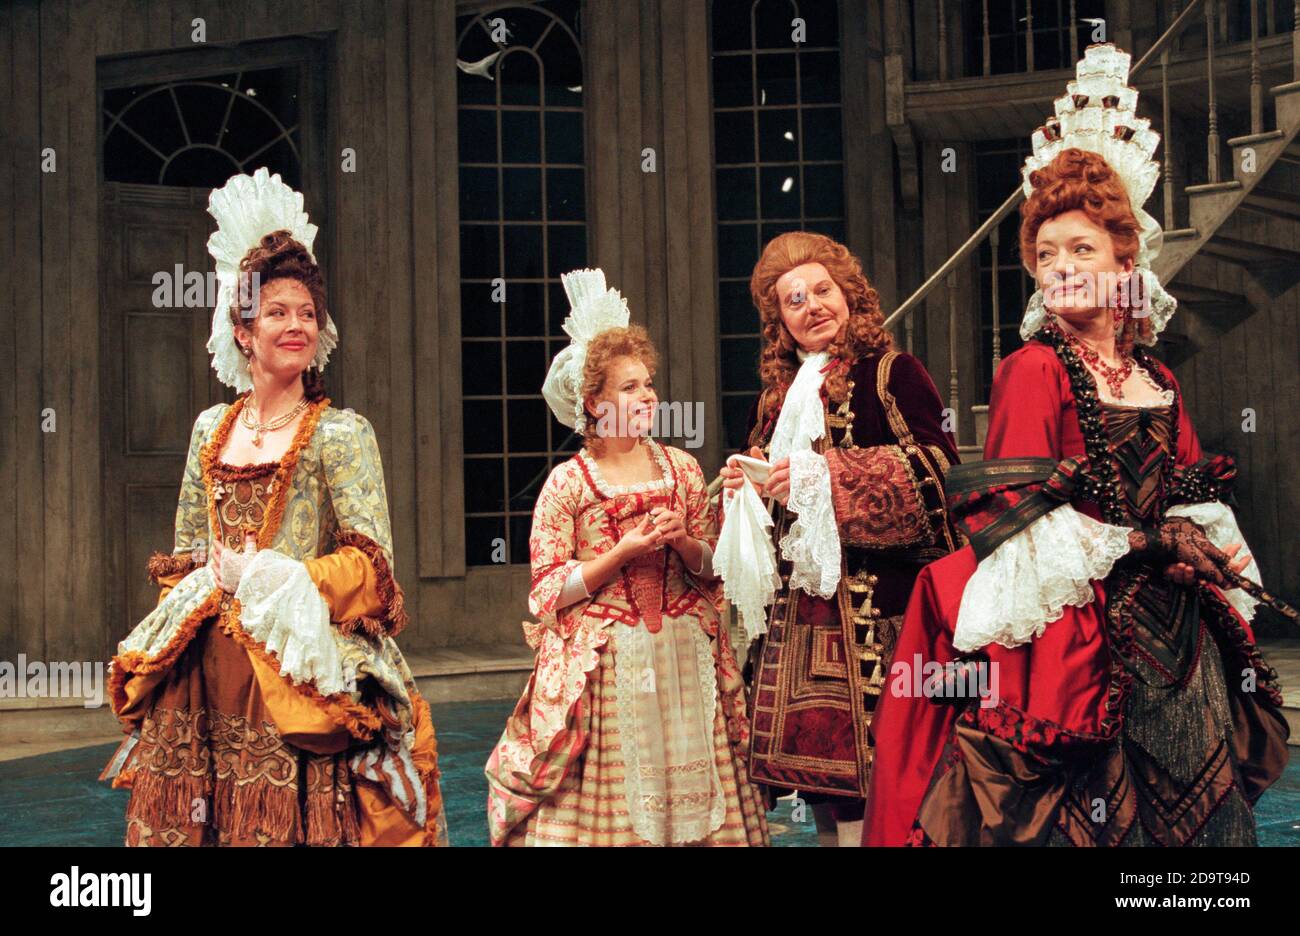 l-r: Jenny Quayle (Mrs Foresight), Rebecca Lacey (Miss Prue), Derek Jacobi (Jack Tattle), Jennifer Hilary (Mrs Frail) in LOVE FOR LOVE by William Congreve at the Chichester Festival Theatre, West Sussex, England  27/04/1996  design: Tim Goodchild  lighting: Nick Chelton  choreography: Lindsay Dolan  director: Ian Judge Stock Photo